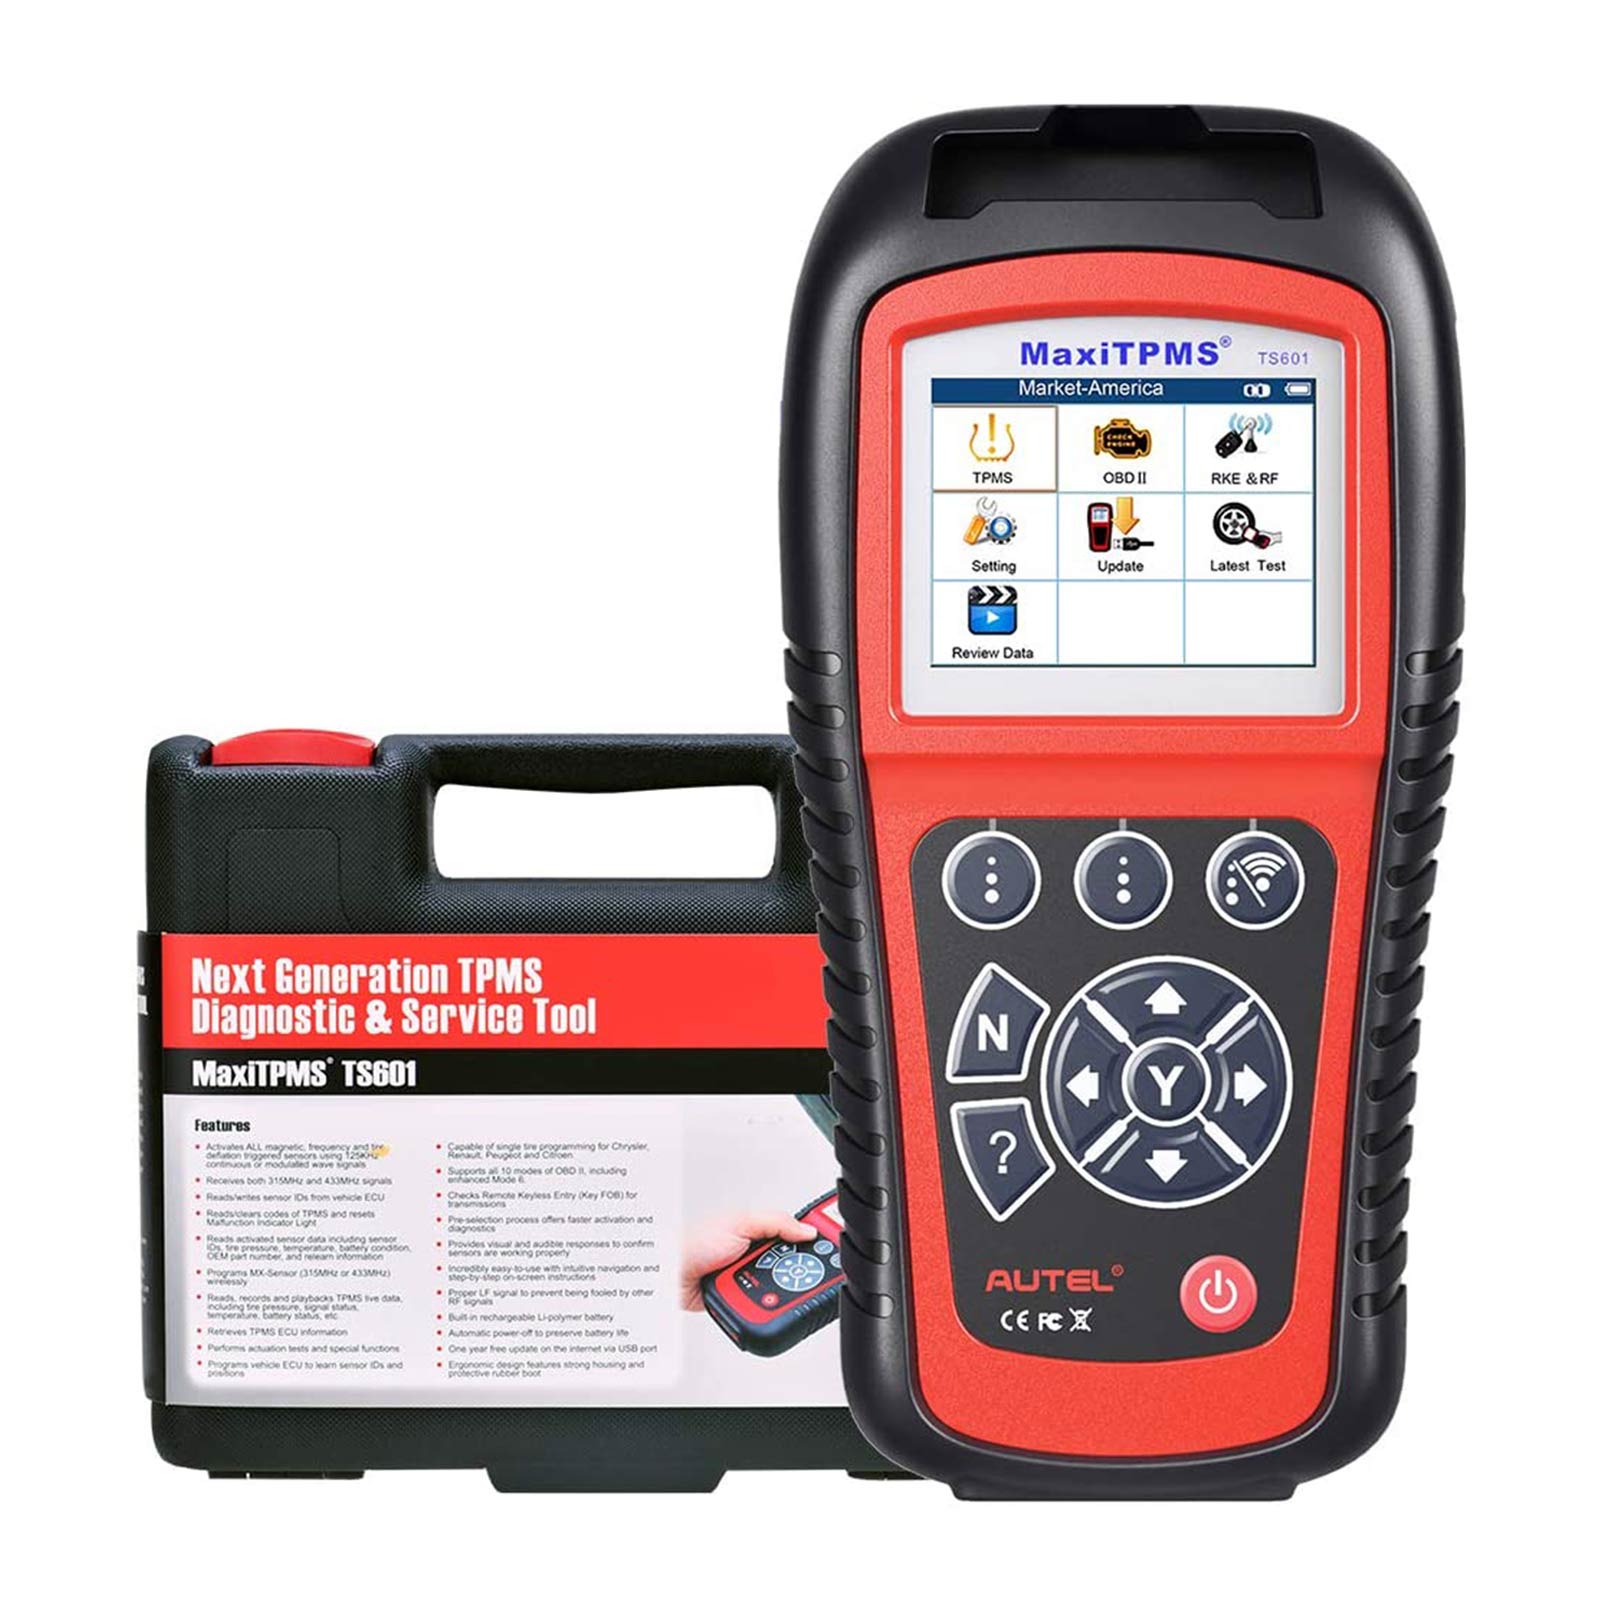 [Ship from US/UK/EU] Original Autel MaxiTPMS TS601 Universal TPMS Relearn  Tool with Complete TPMS and Sensor Programming